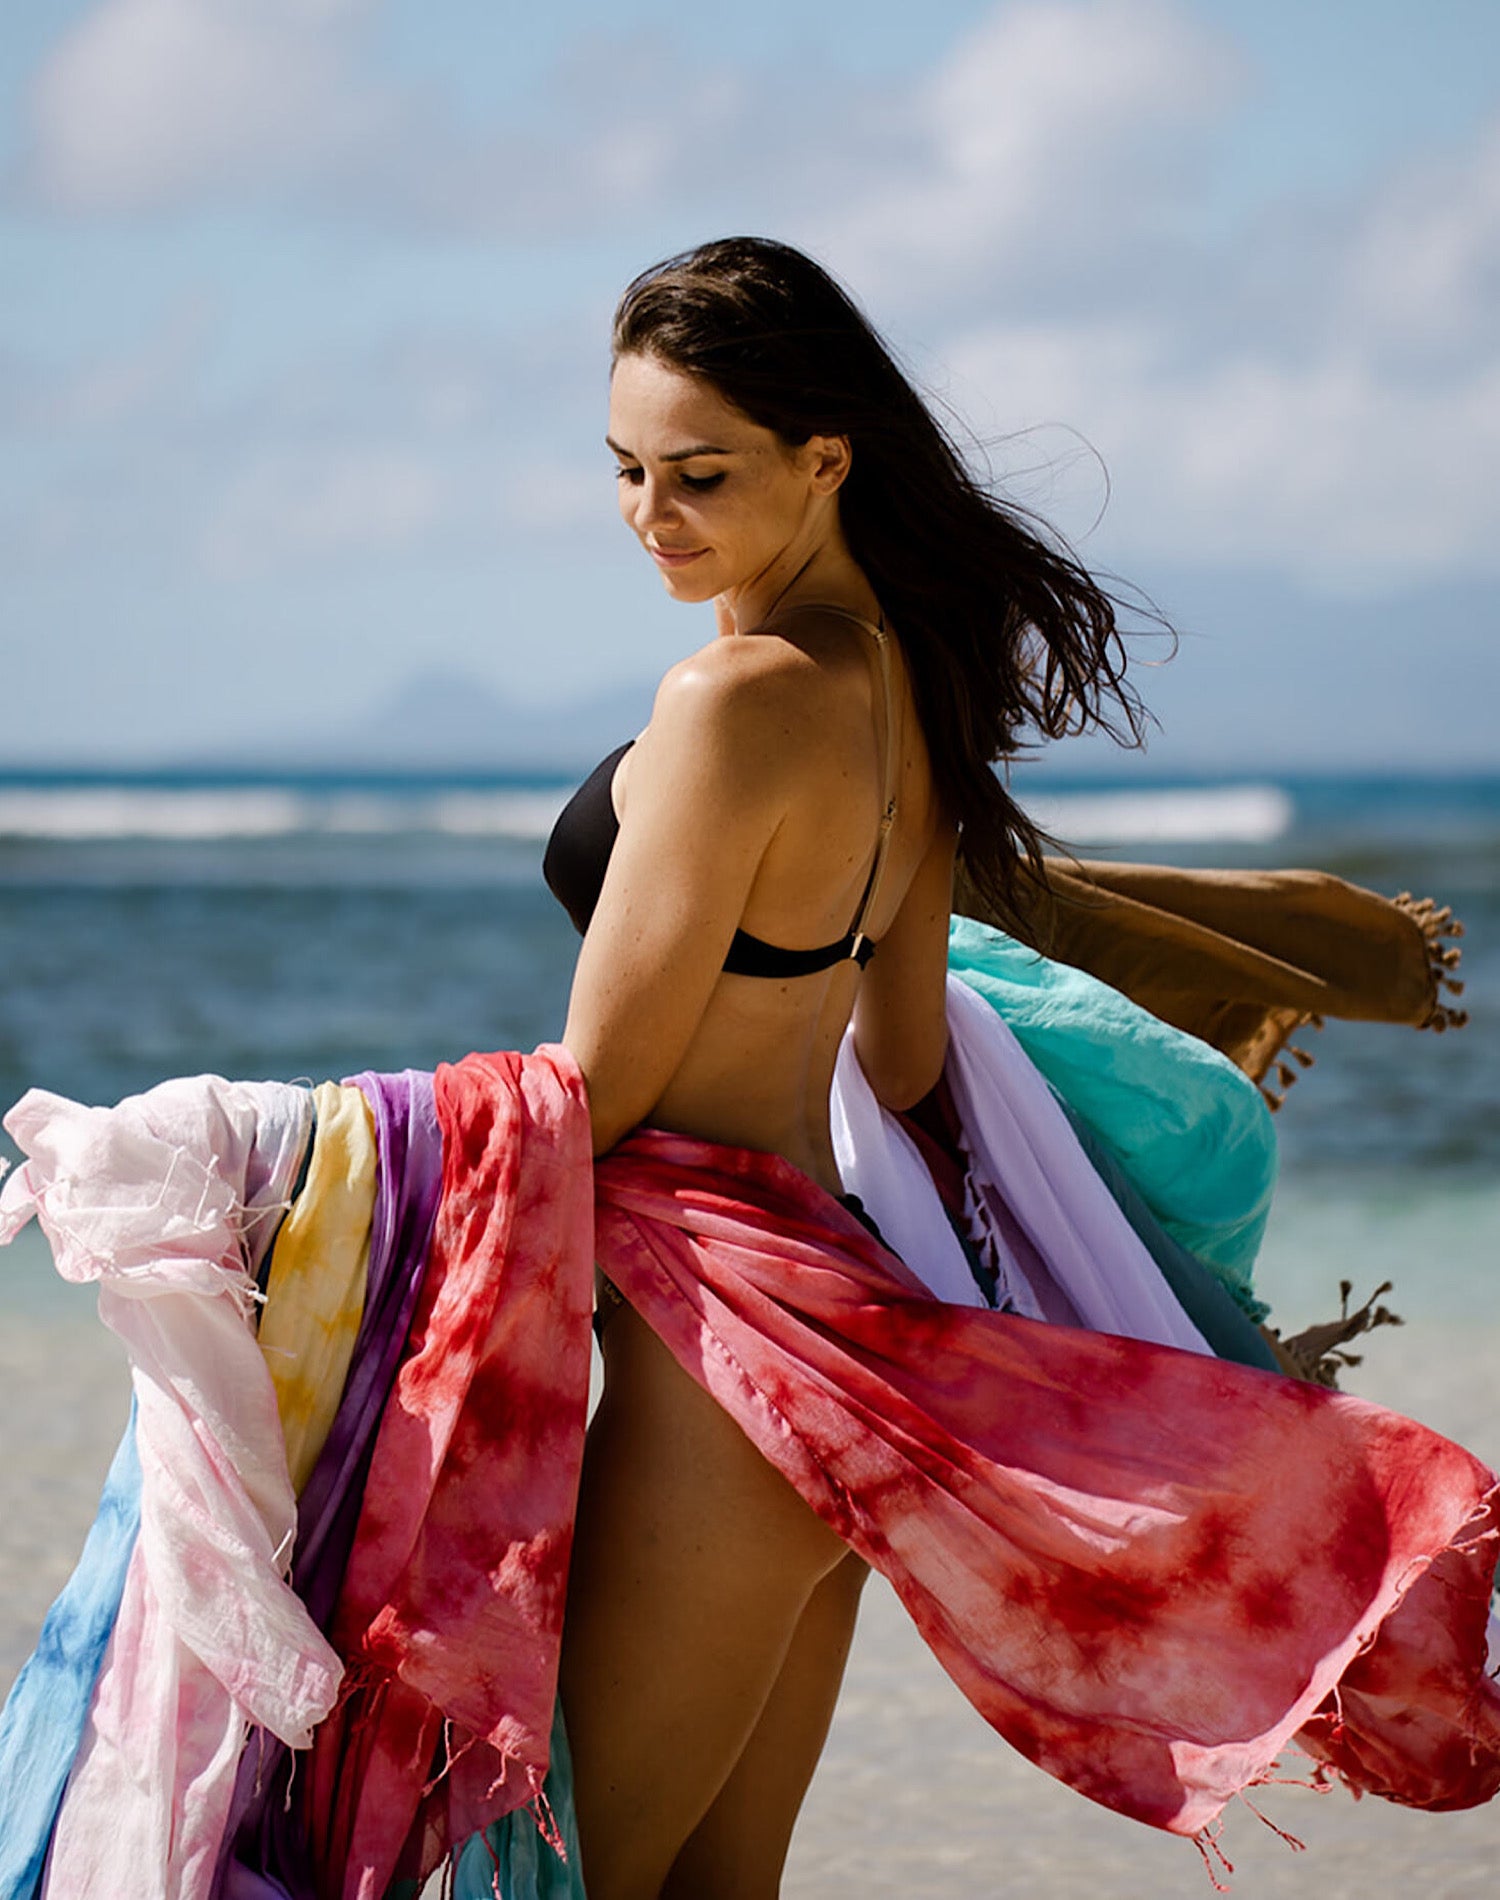 A Beach Sarong by Héliquadrisme (a French Company You'll Love